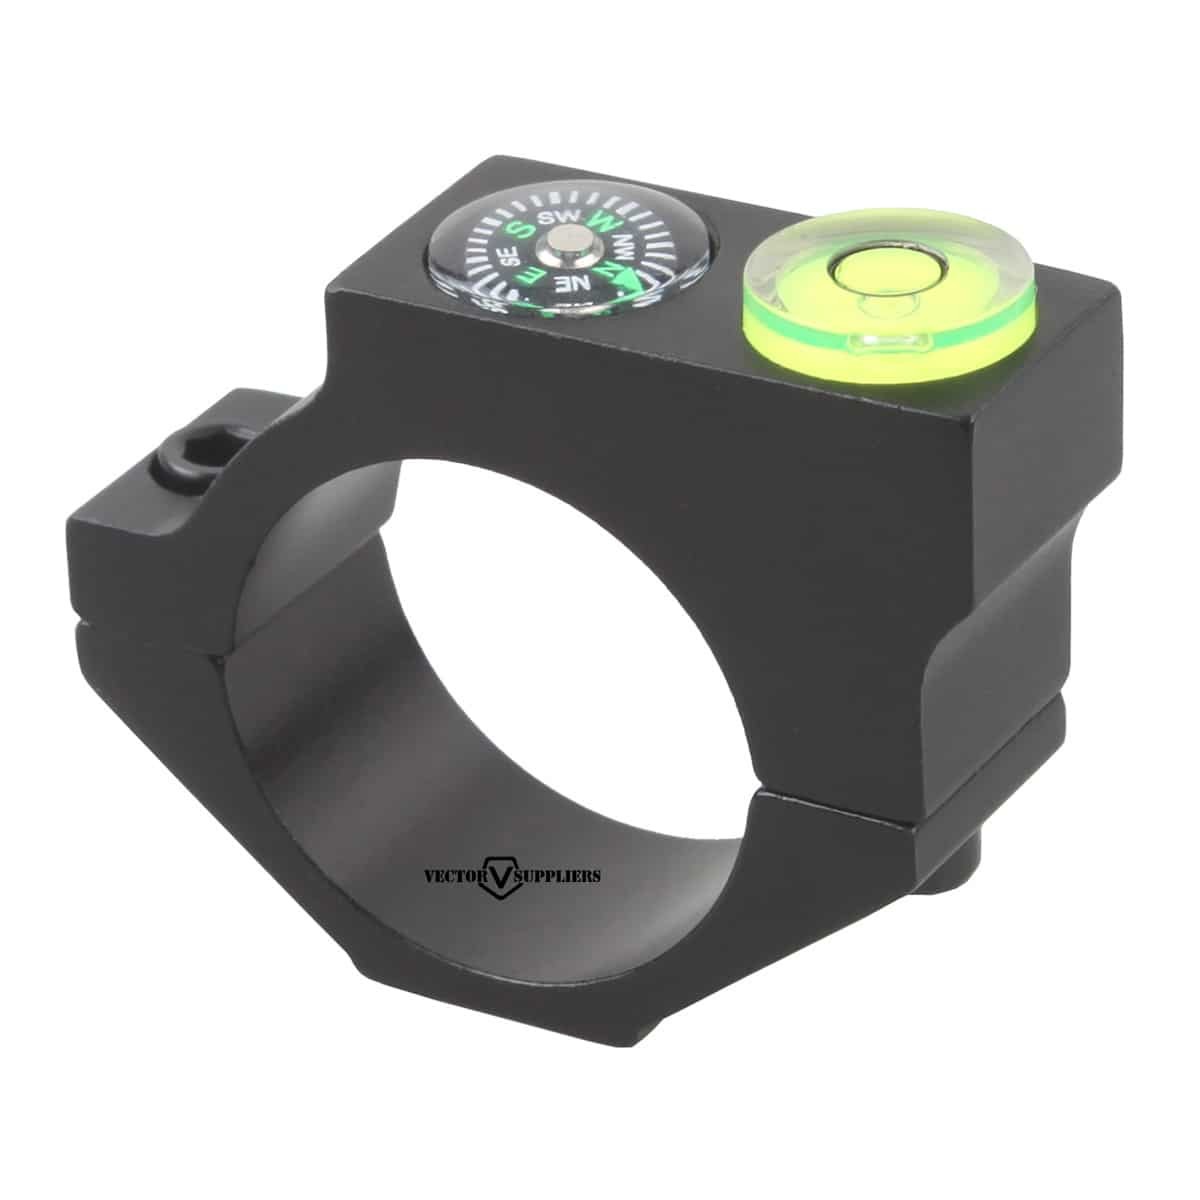 25.4mm ACD Bubble Level Mount w/ compass